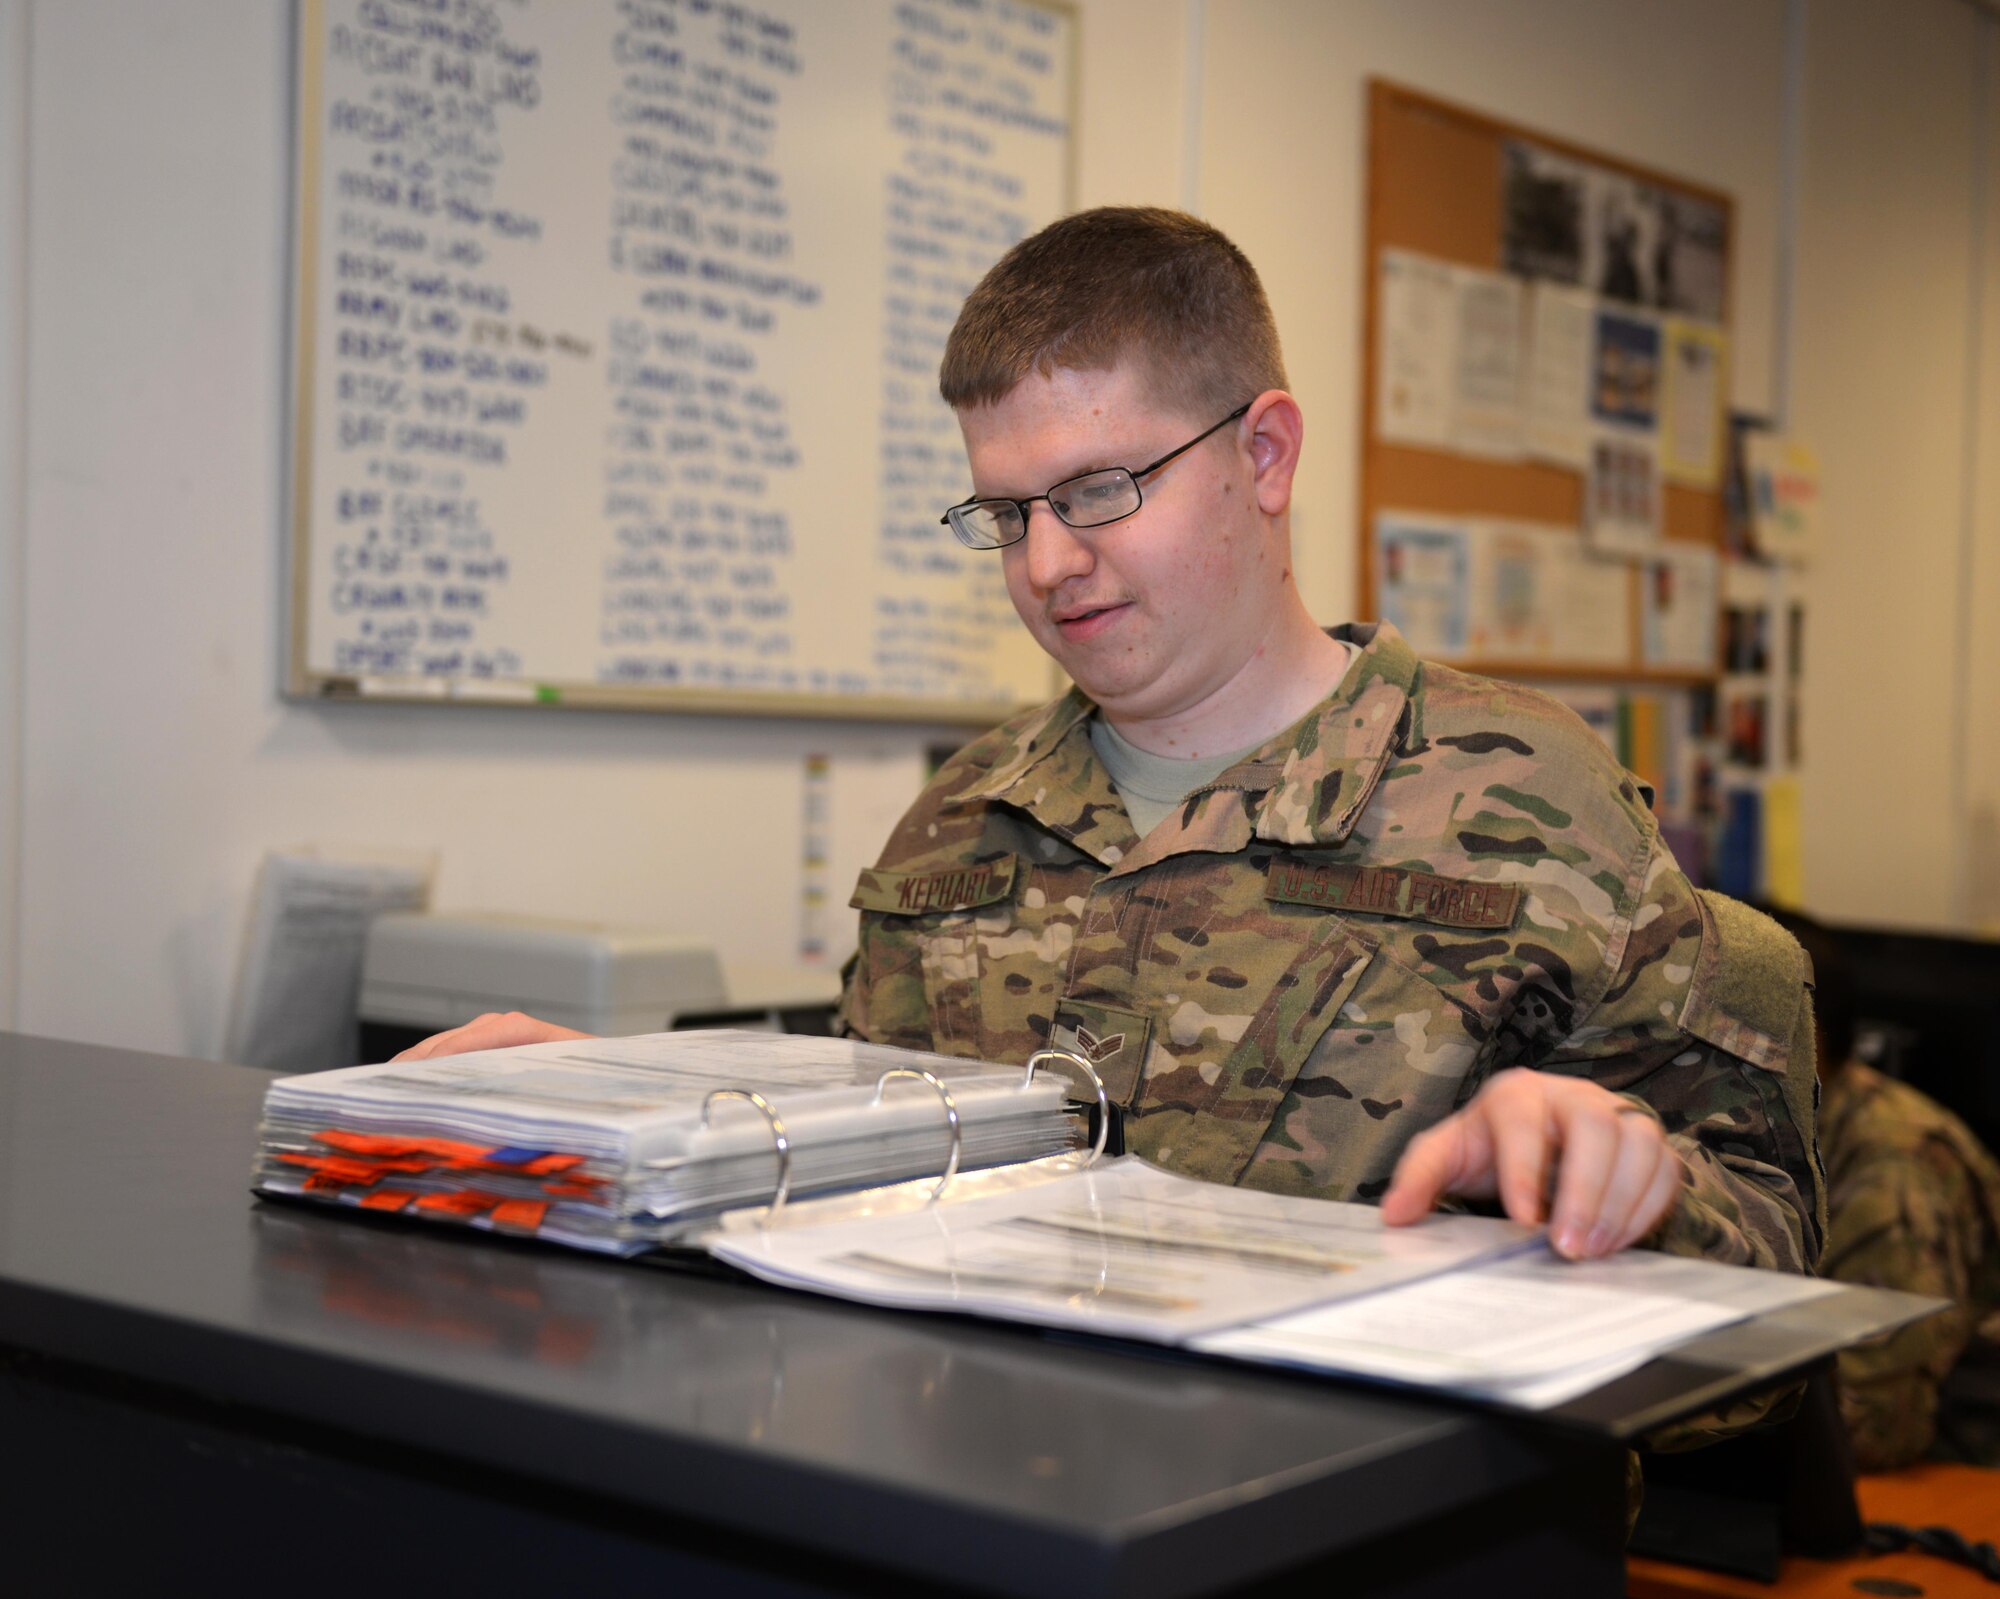 U.S. Air Force Senior Airman Tyler Kephart, 455th Expeditionary Force Support Squadron Personnel Support for Contingency Operations deliberate crisis action planning executions segments operator, looks through PERSCO records Aug. 3, 2015, at Bagram Airfield, Afghanistan. The PERSCO team is responsible for keeping accountability for all Air Force personnel at BAF and surrounding FOBs in the AOR. (U.S. Air Force photo by Senior Airman Cierra Presentado/Released)